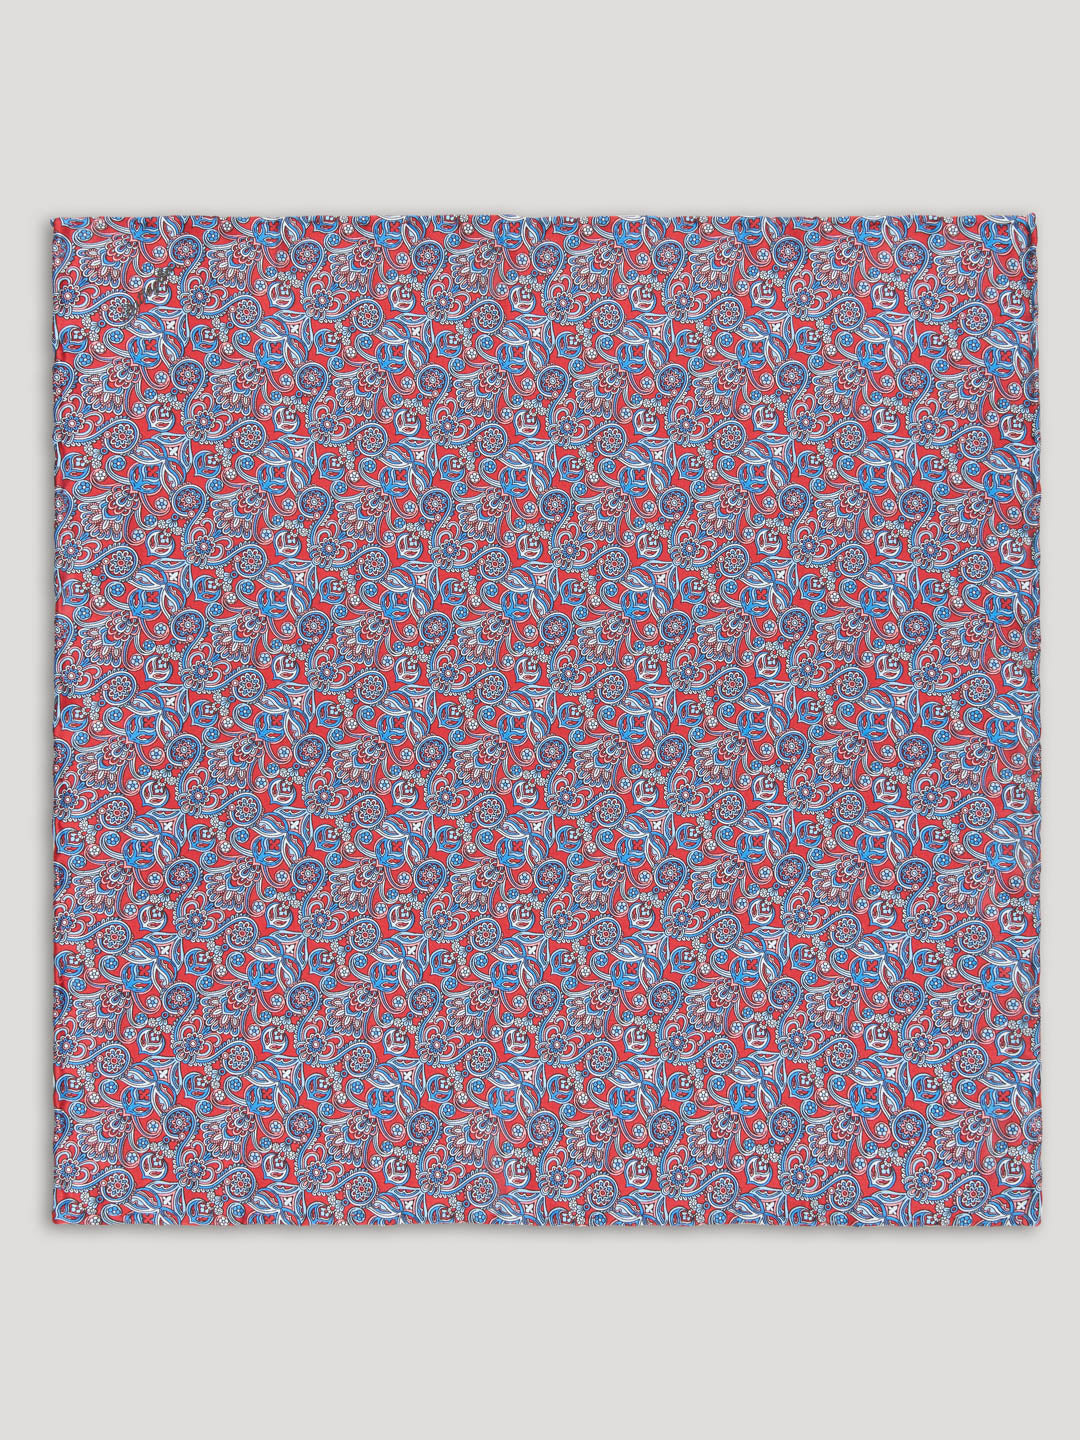 Handkerchief with red and blue floral design. 